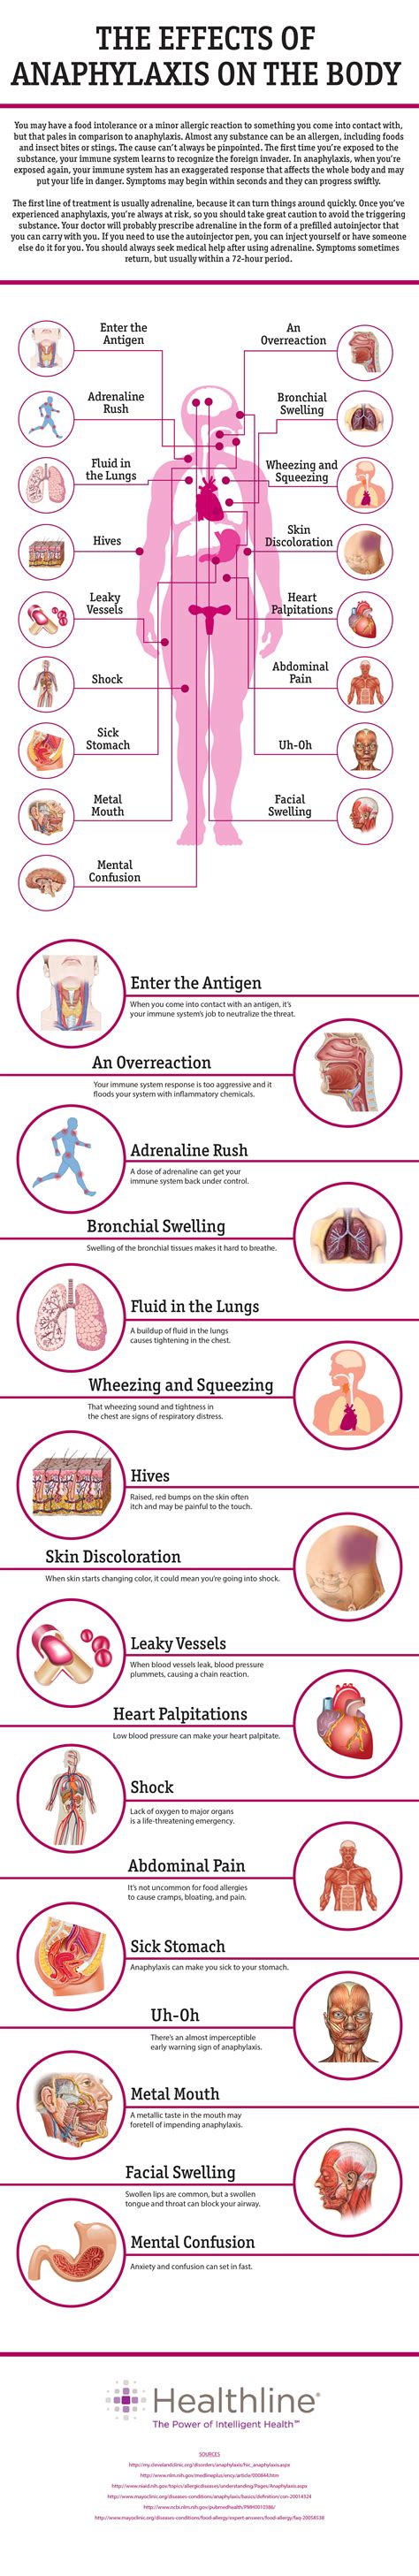 17 Effects Of Anaphylaxis On The Body